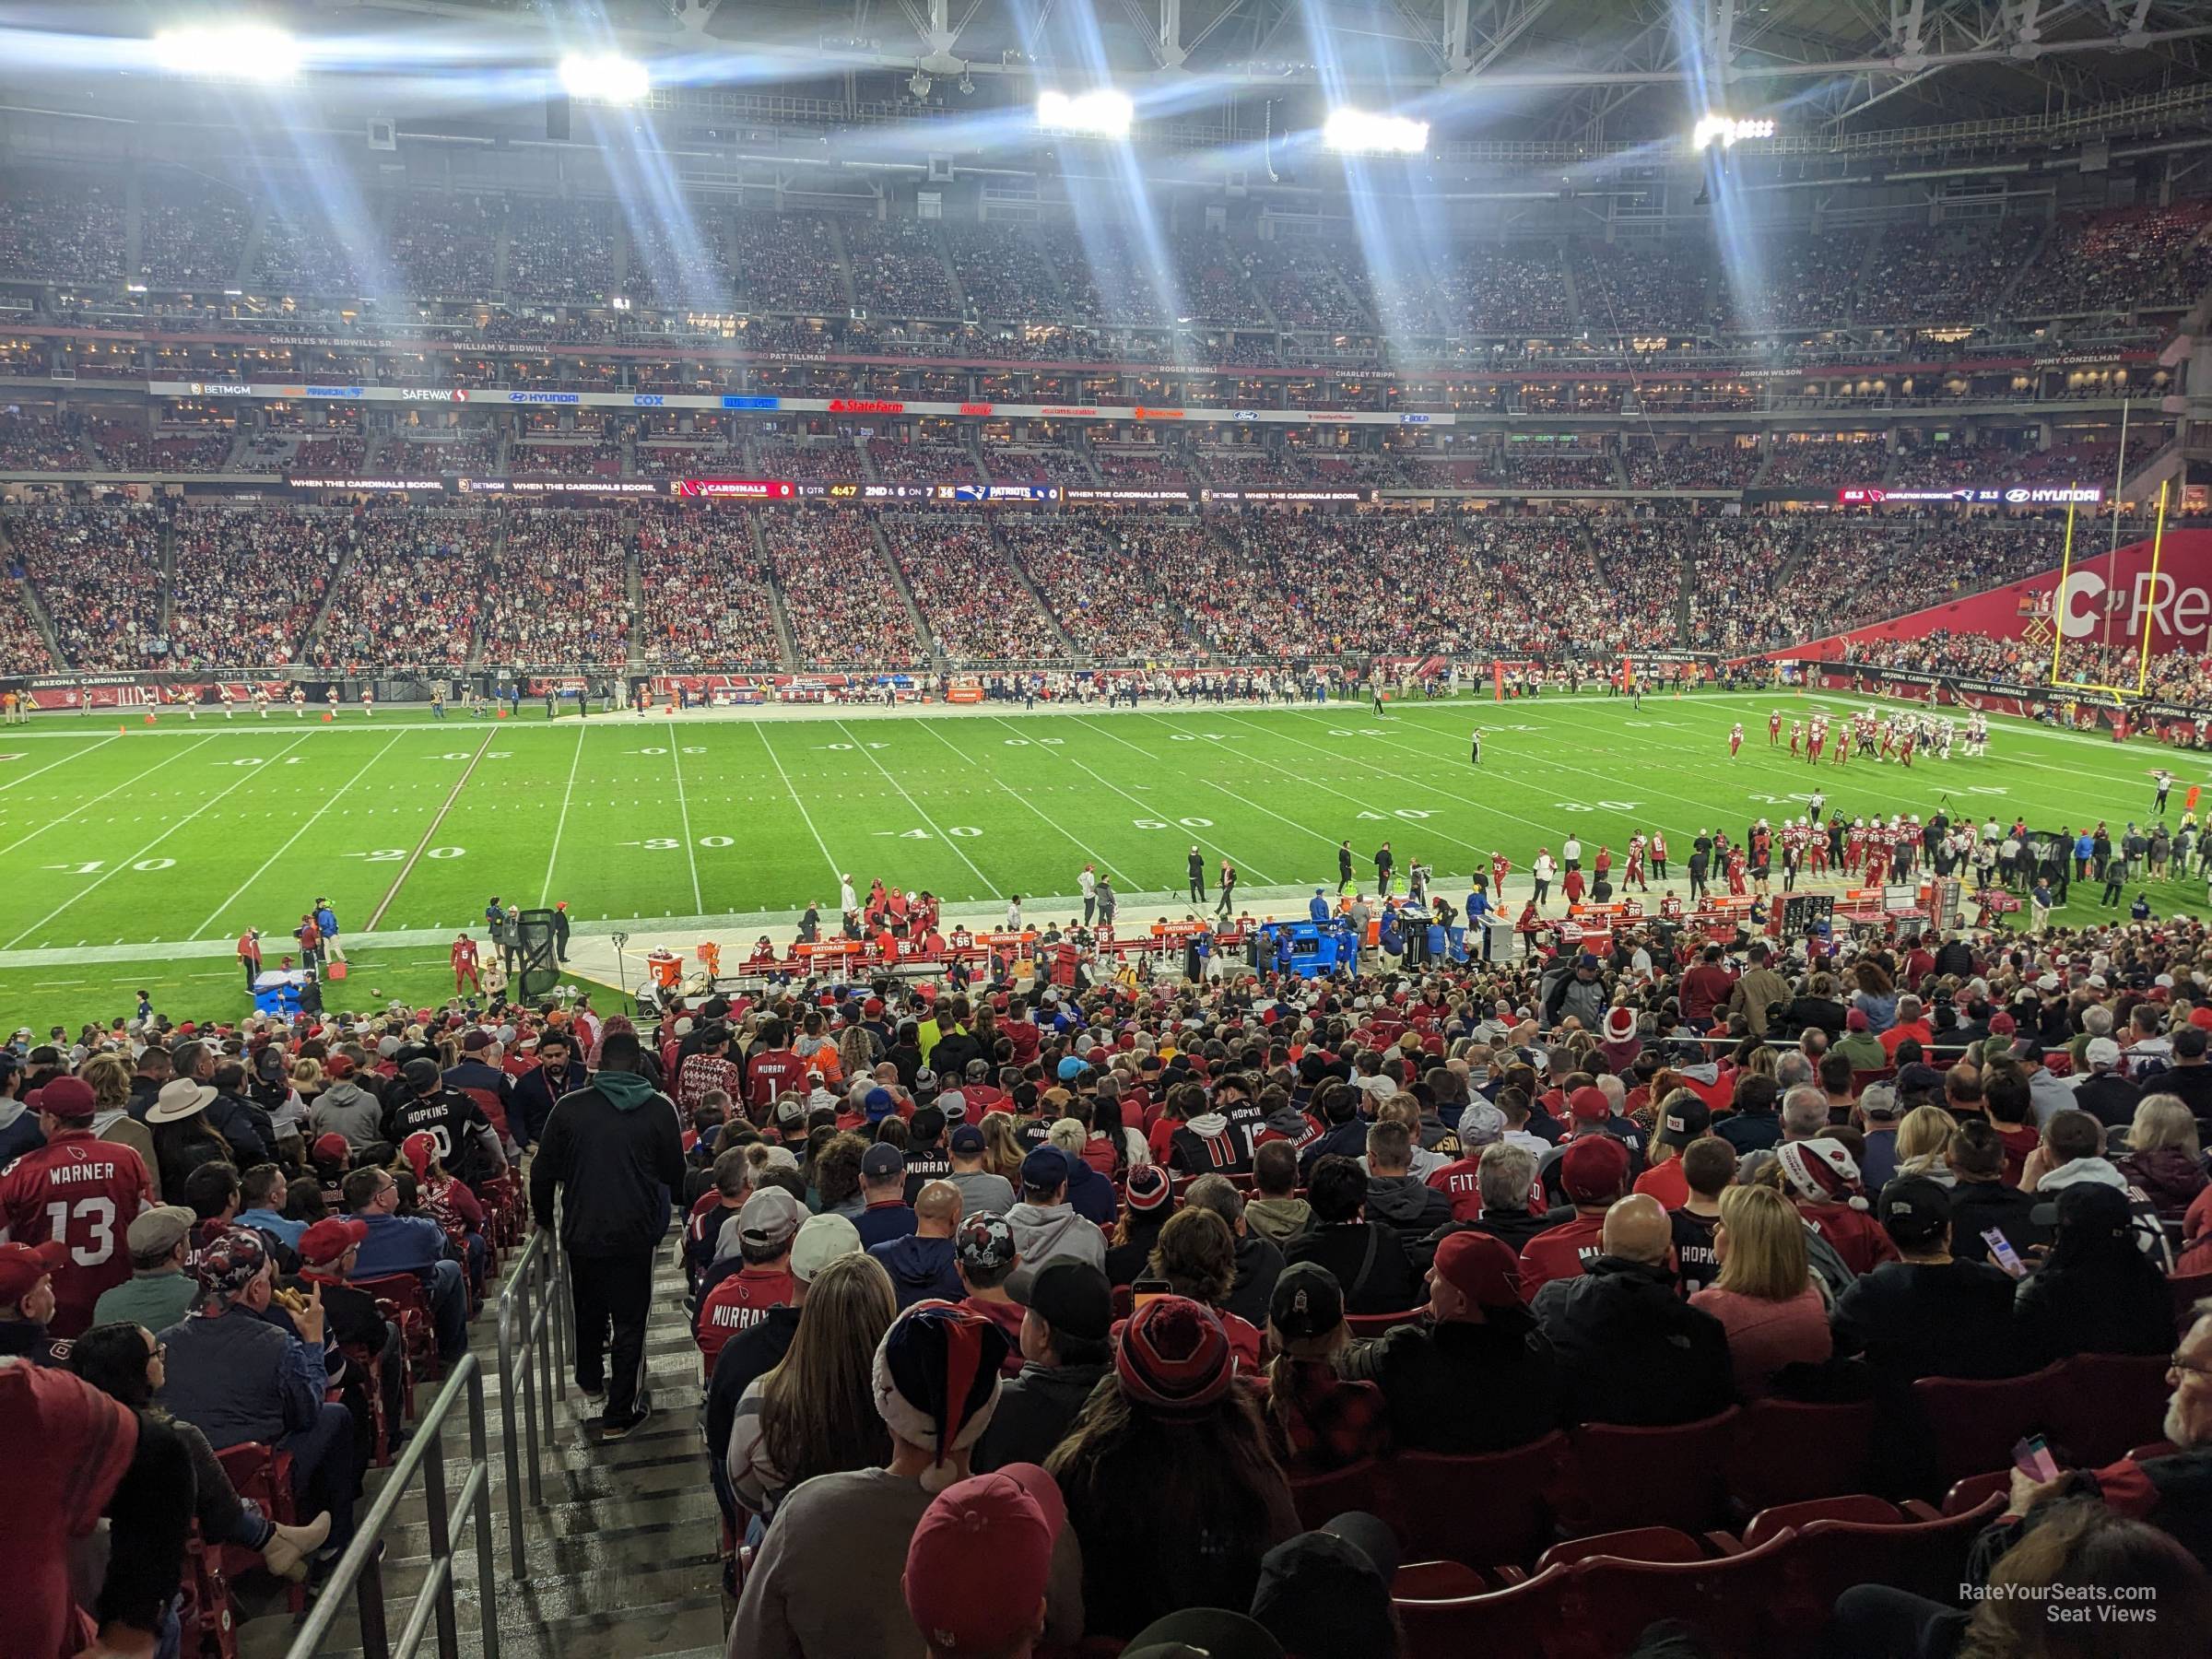 section 110, row 41 seat view  for football - state farm stadium